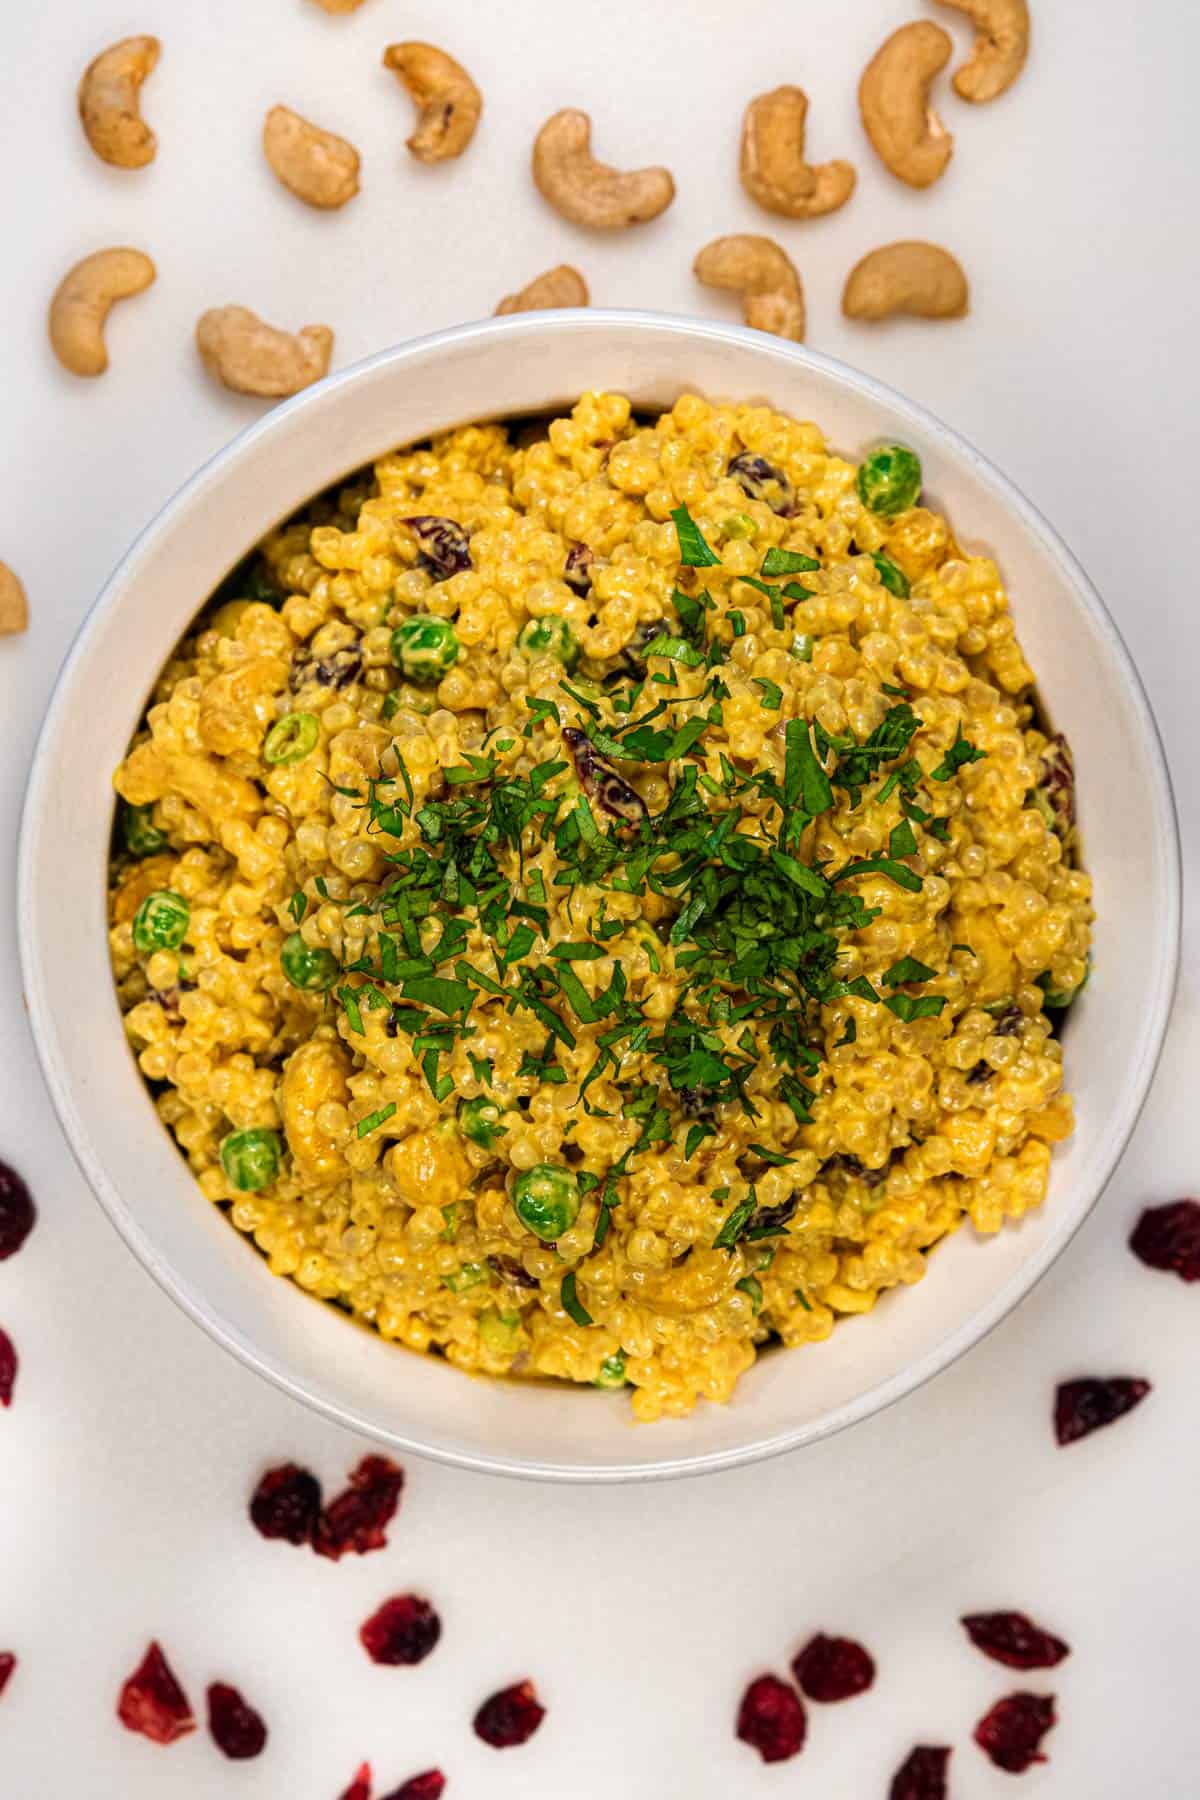 Dish of vegan curried Israeli couscous salad with cashews and cranberries.